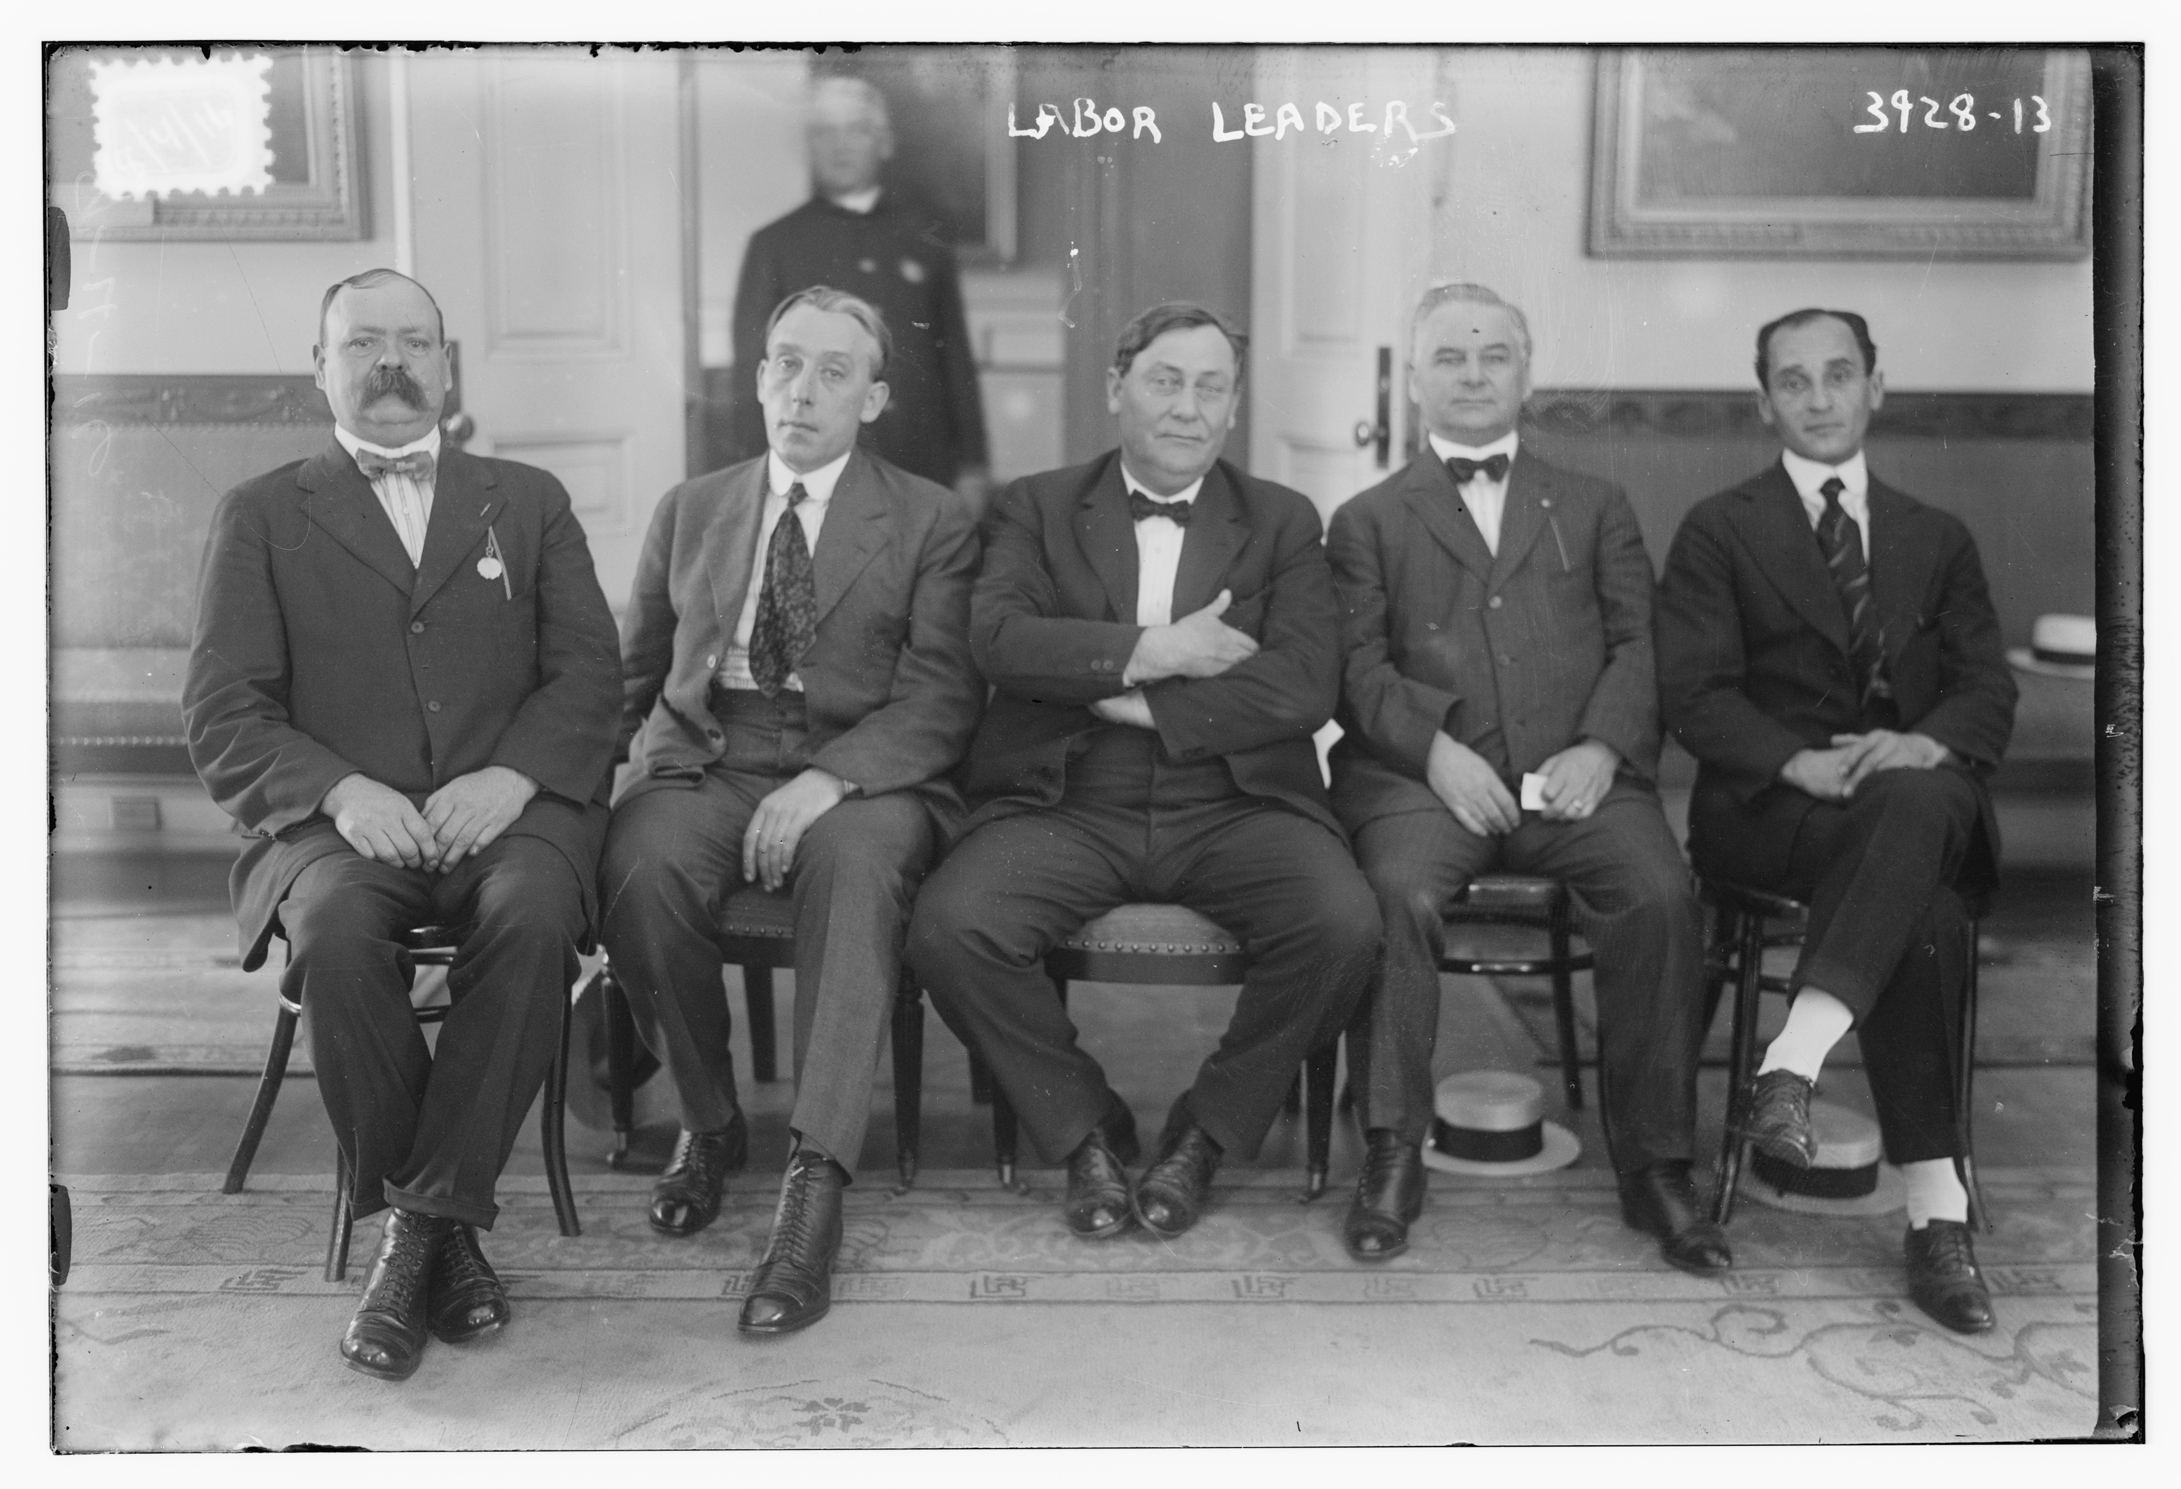 August 4, 1916: From left: Irish American  labor leaders Timothy Healy, William B.  Fitzgerald, William D. Mahon, Hugh Frayne (general  organizer in  New York for  the American  Federation of Labor), and Louis Fridiger. Probably taken during the streetcar strike in New York City, which took place in July and August of 1916. Fitzgerald, Mahon, and Fridiger  represented the Amalgamated  Association of Street Railway  Employees of  America.